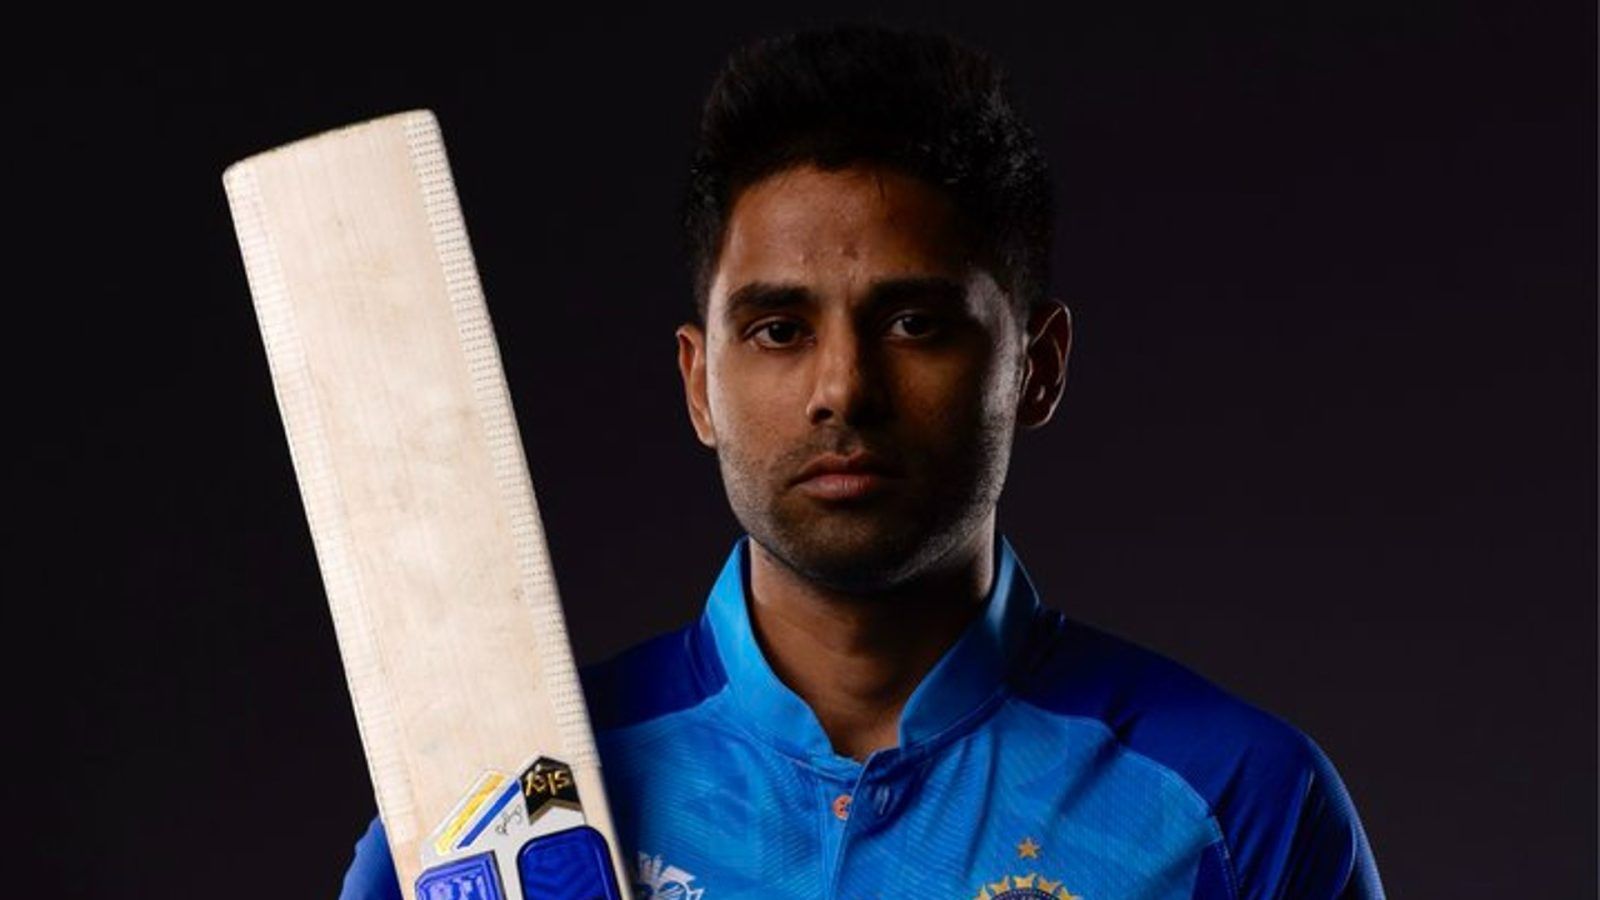 Suryakumar Yadav All you need to know about the star cricketer